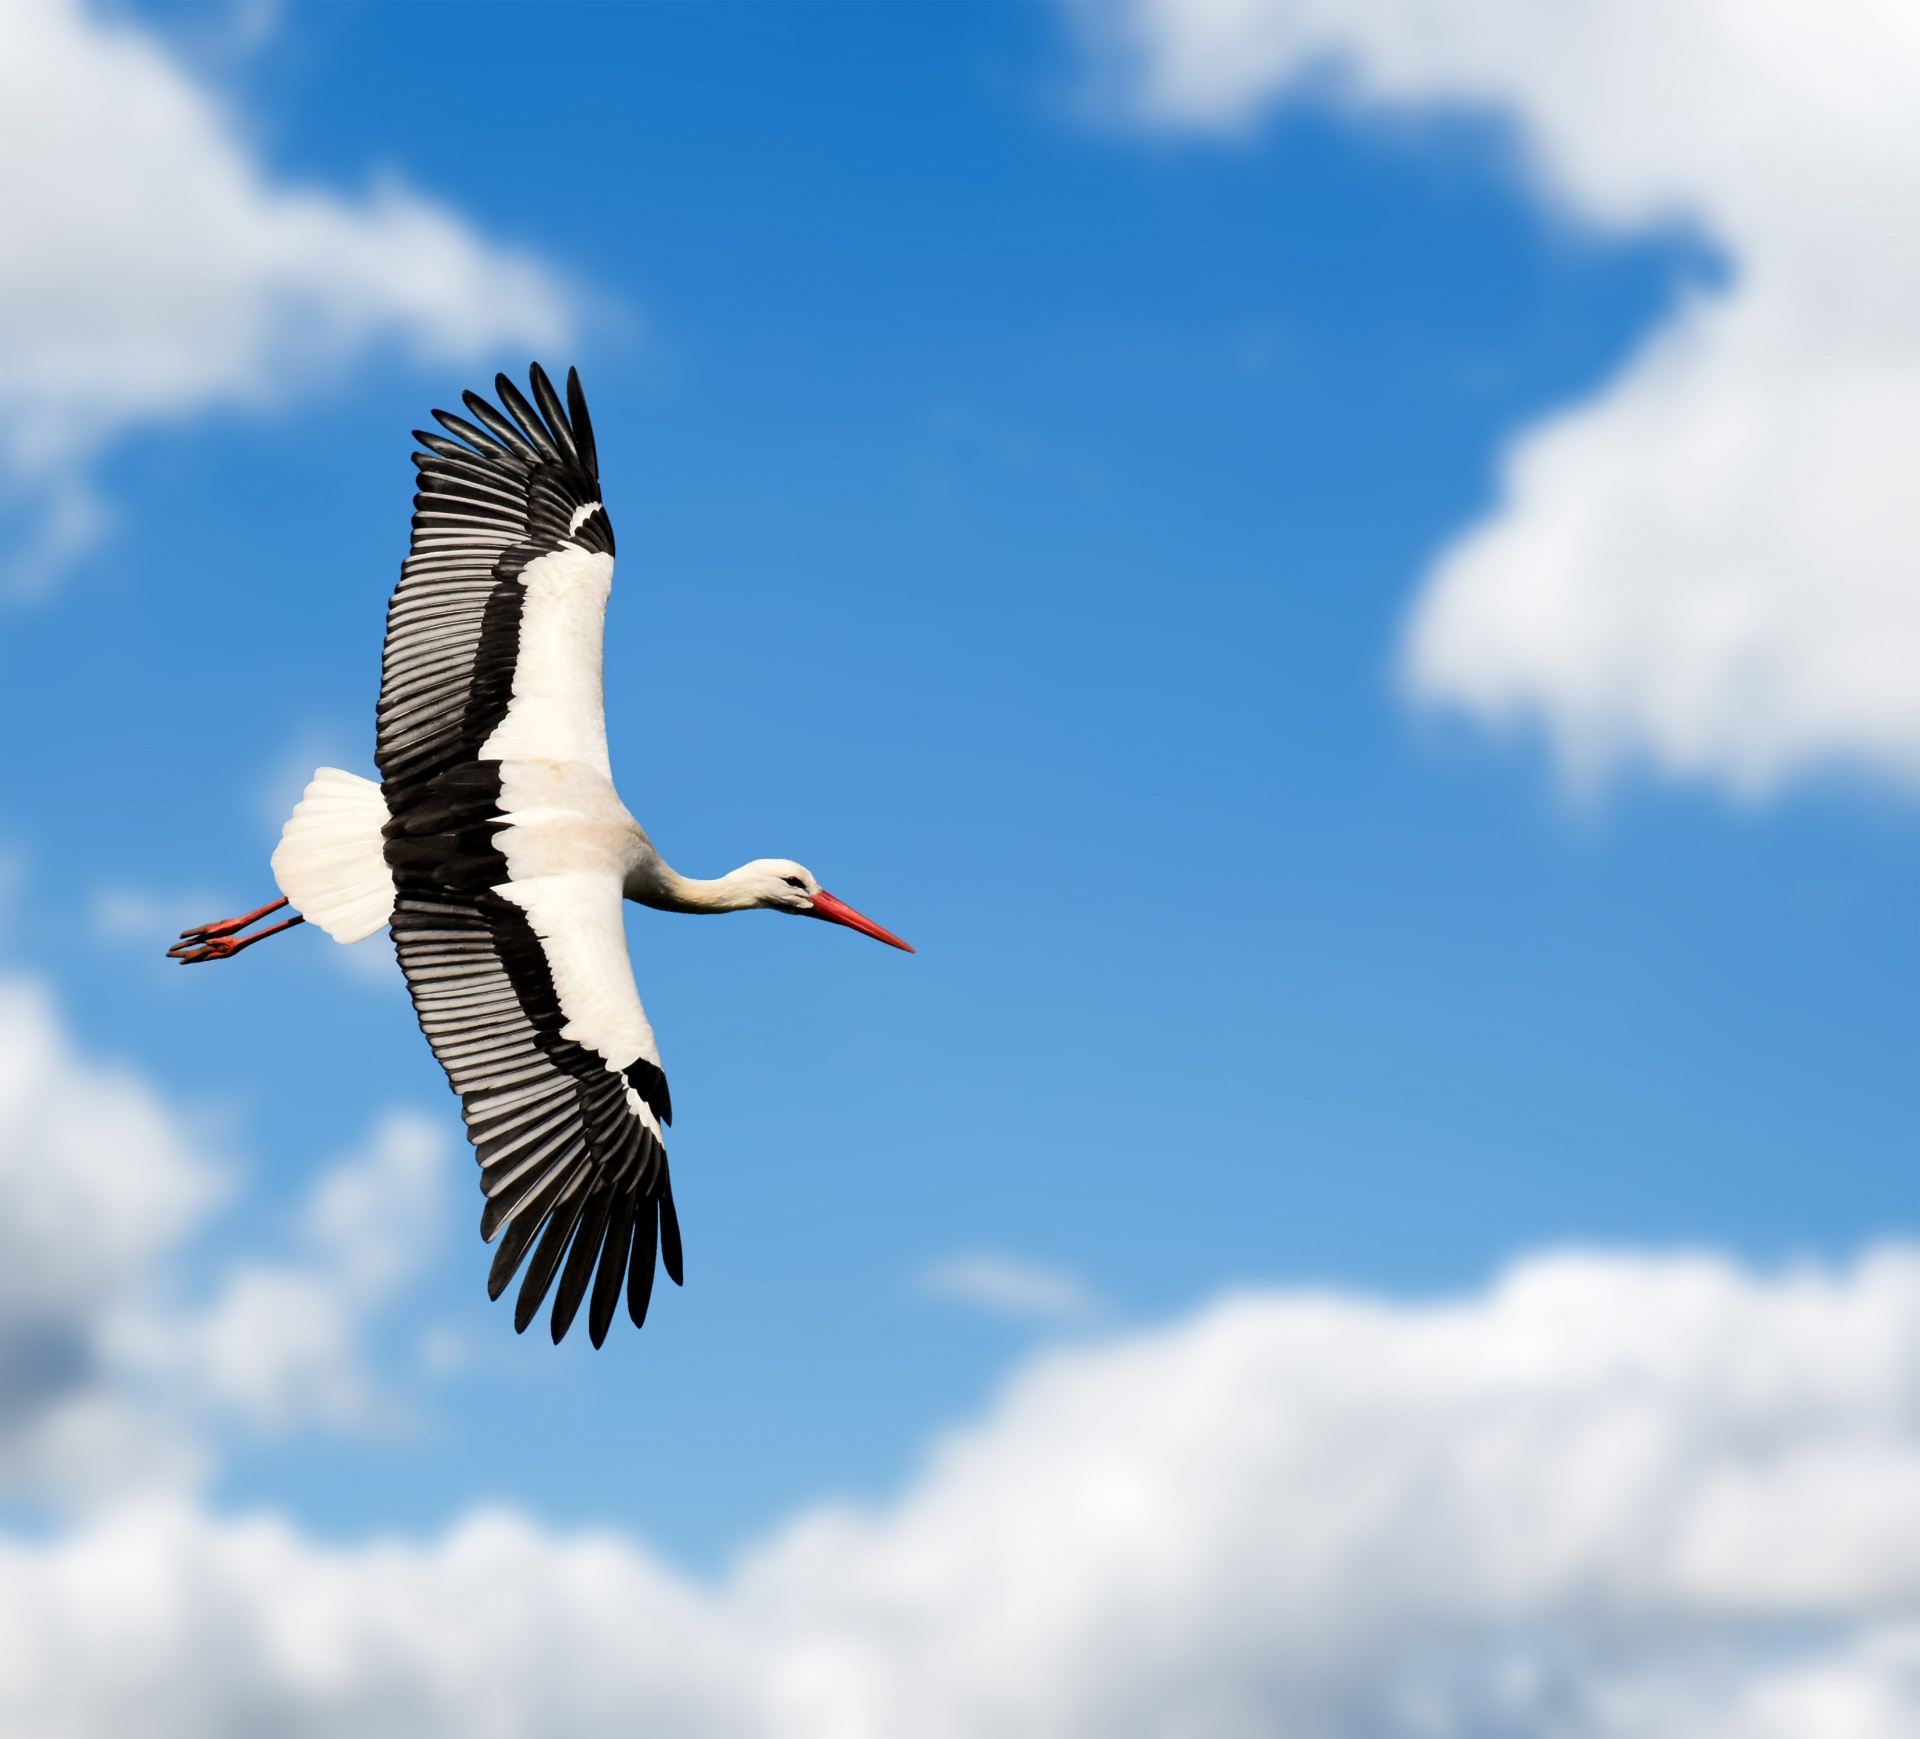 Stork flying high in the sky with wide spread wings